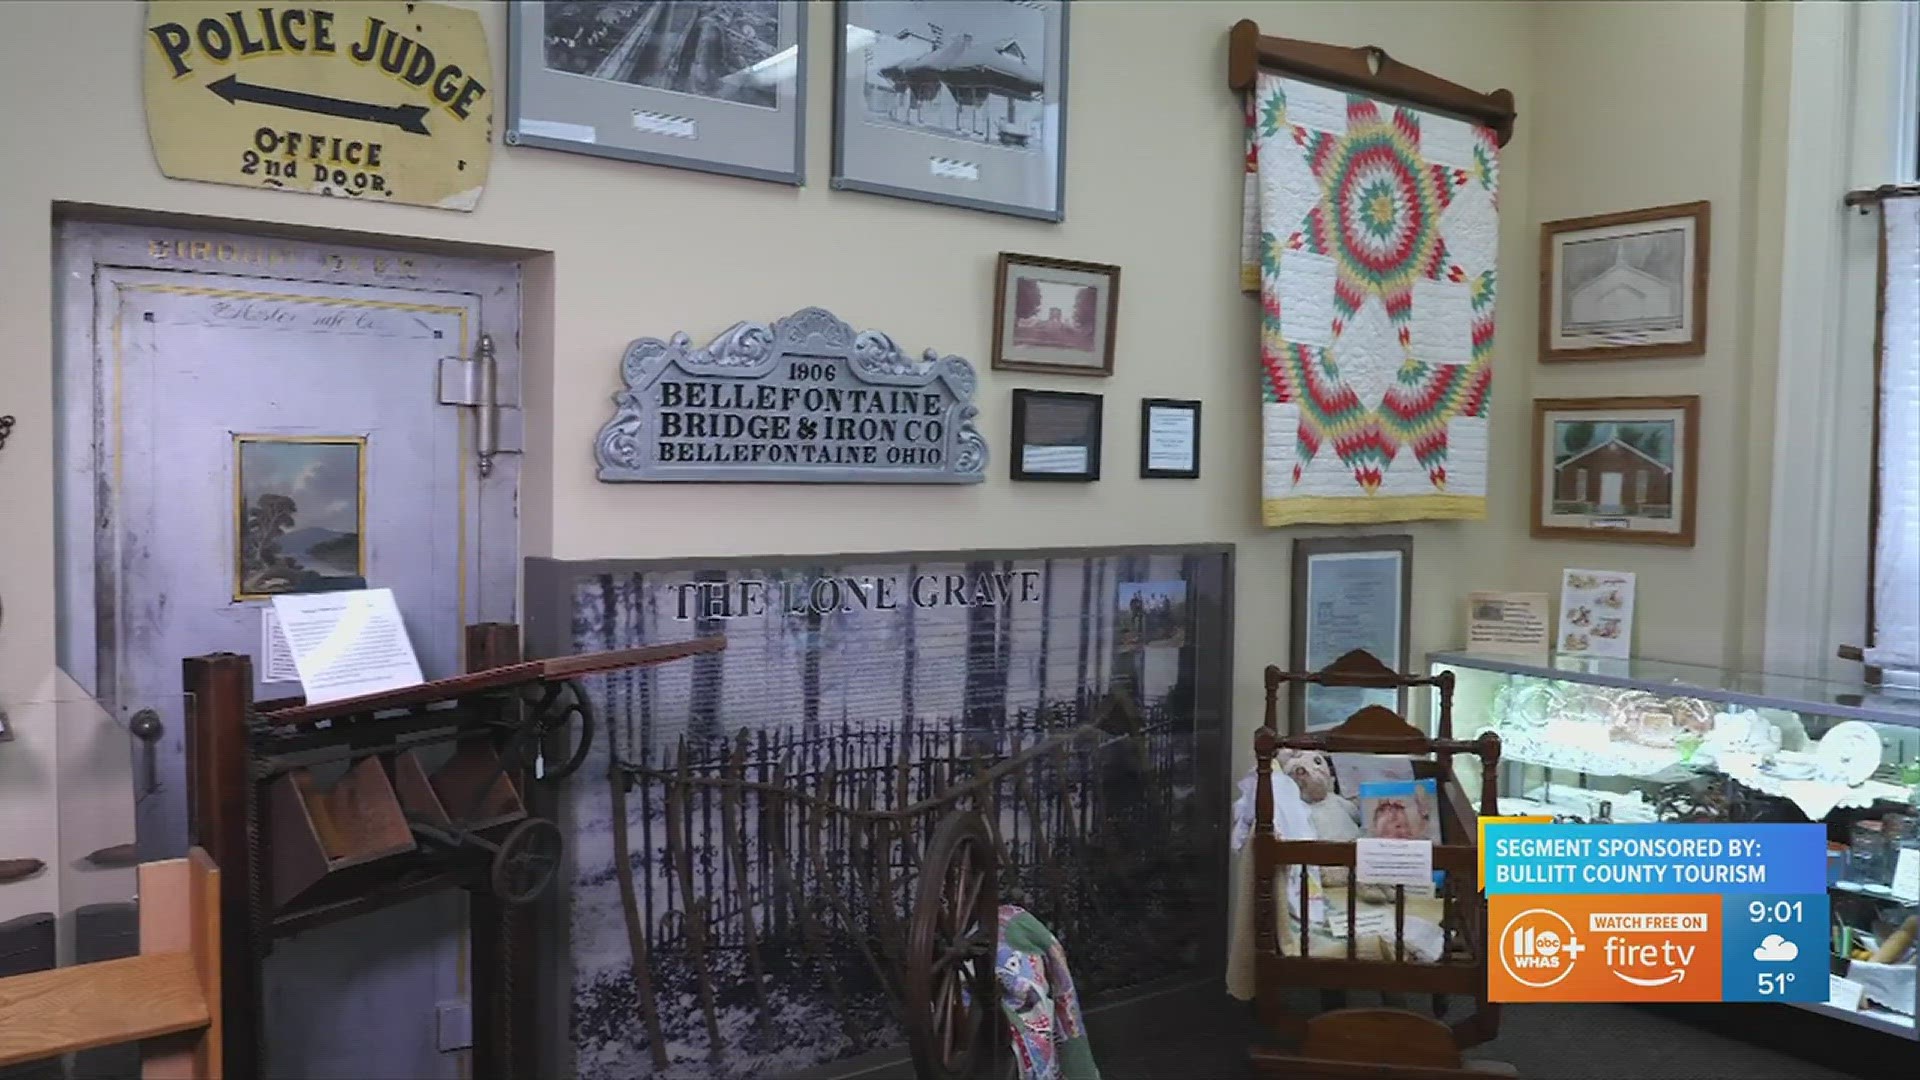 The Bullitt County History Museum holds all of the history that makes the county special.